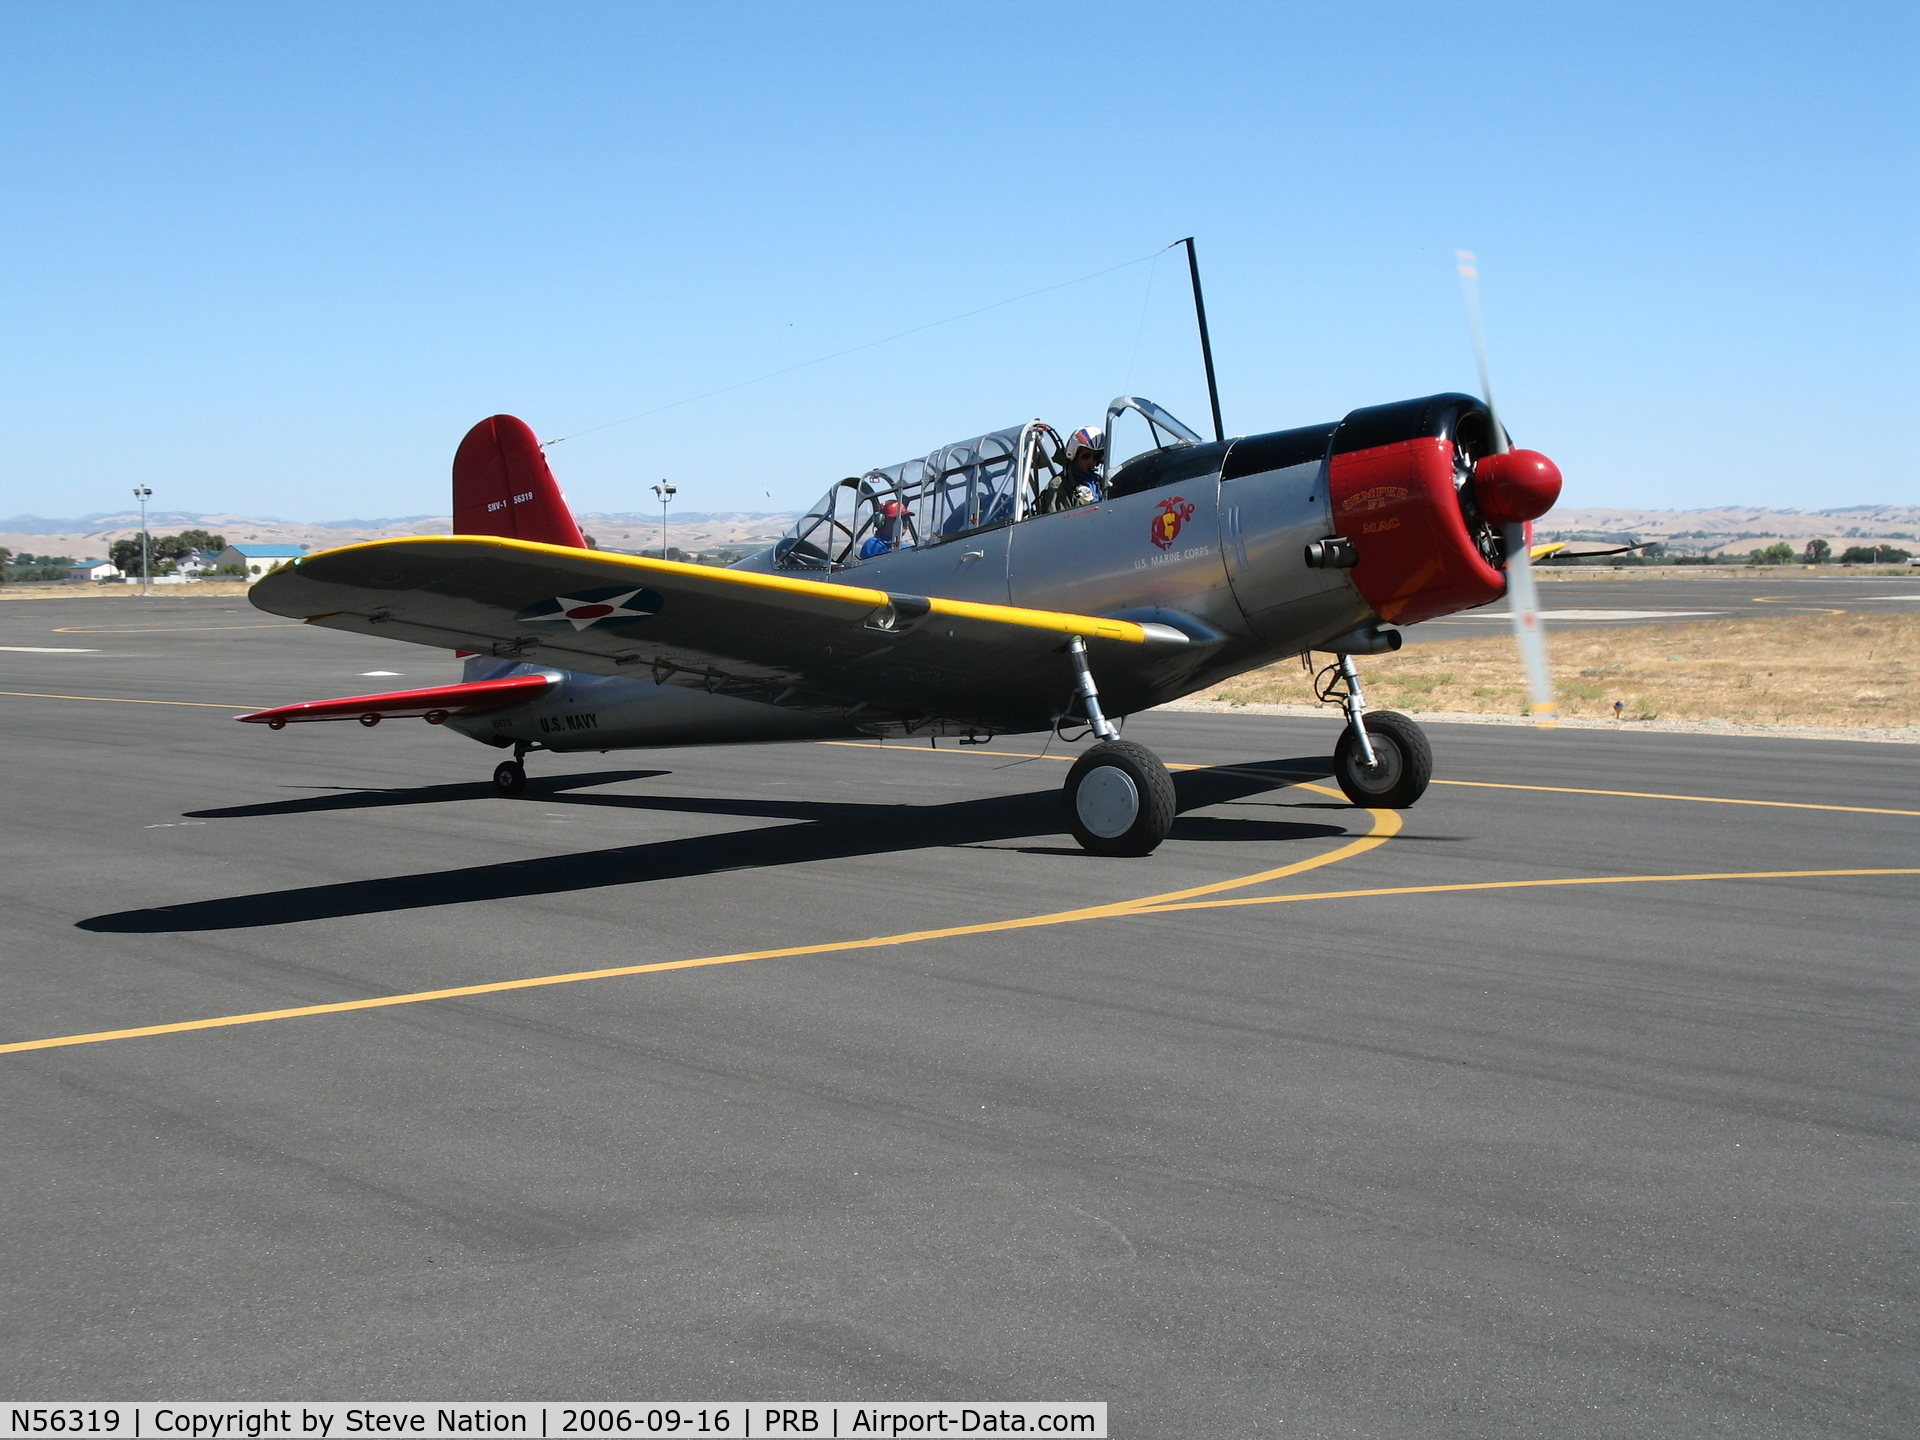 N56319, 1941 Consolidated Vultee BT-13A C/N 2167, Locally-based 1941 SNV-1 